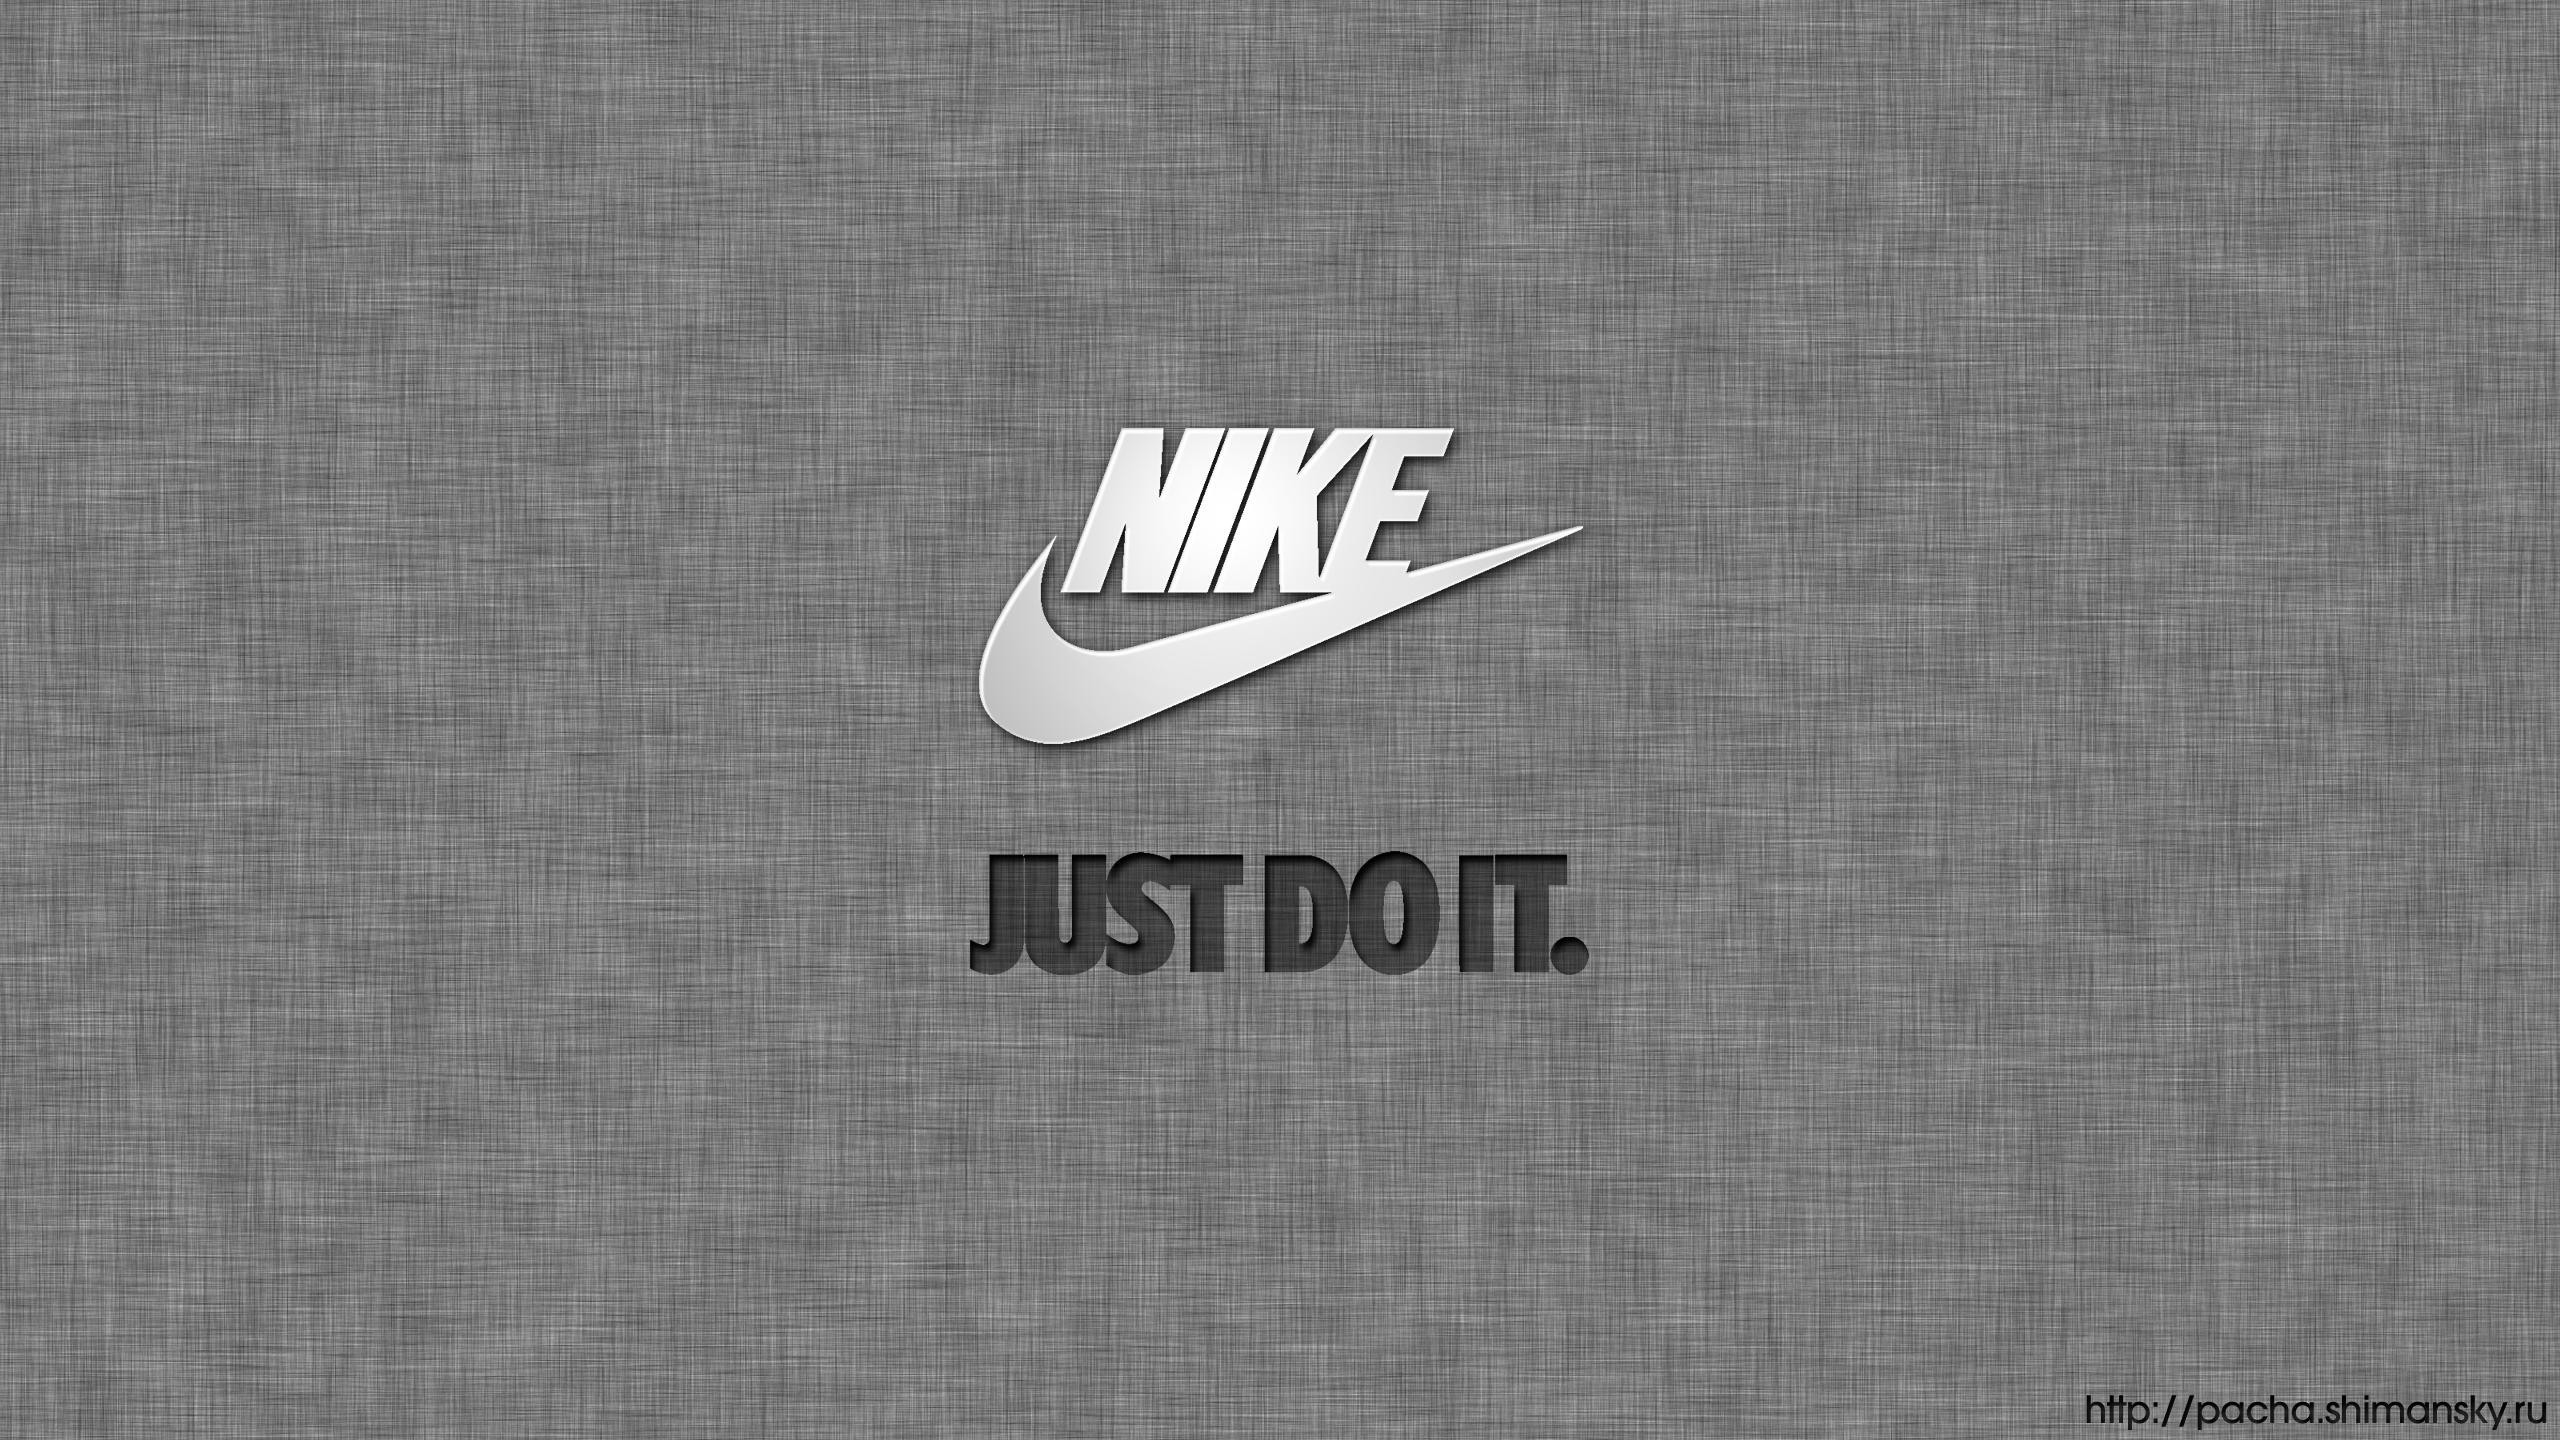 2560x1440 justice Nike slogan logos Just do it wallpaper background